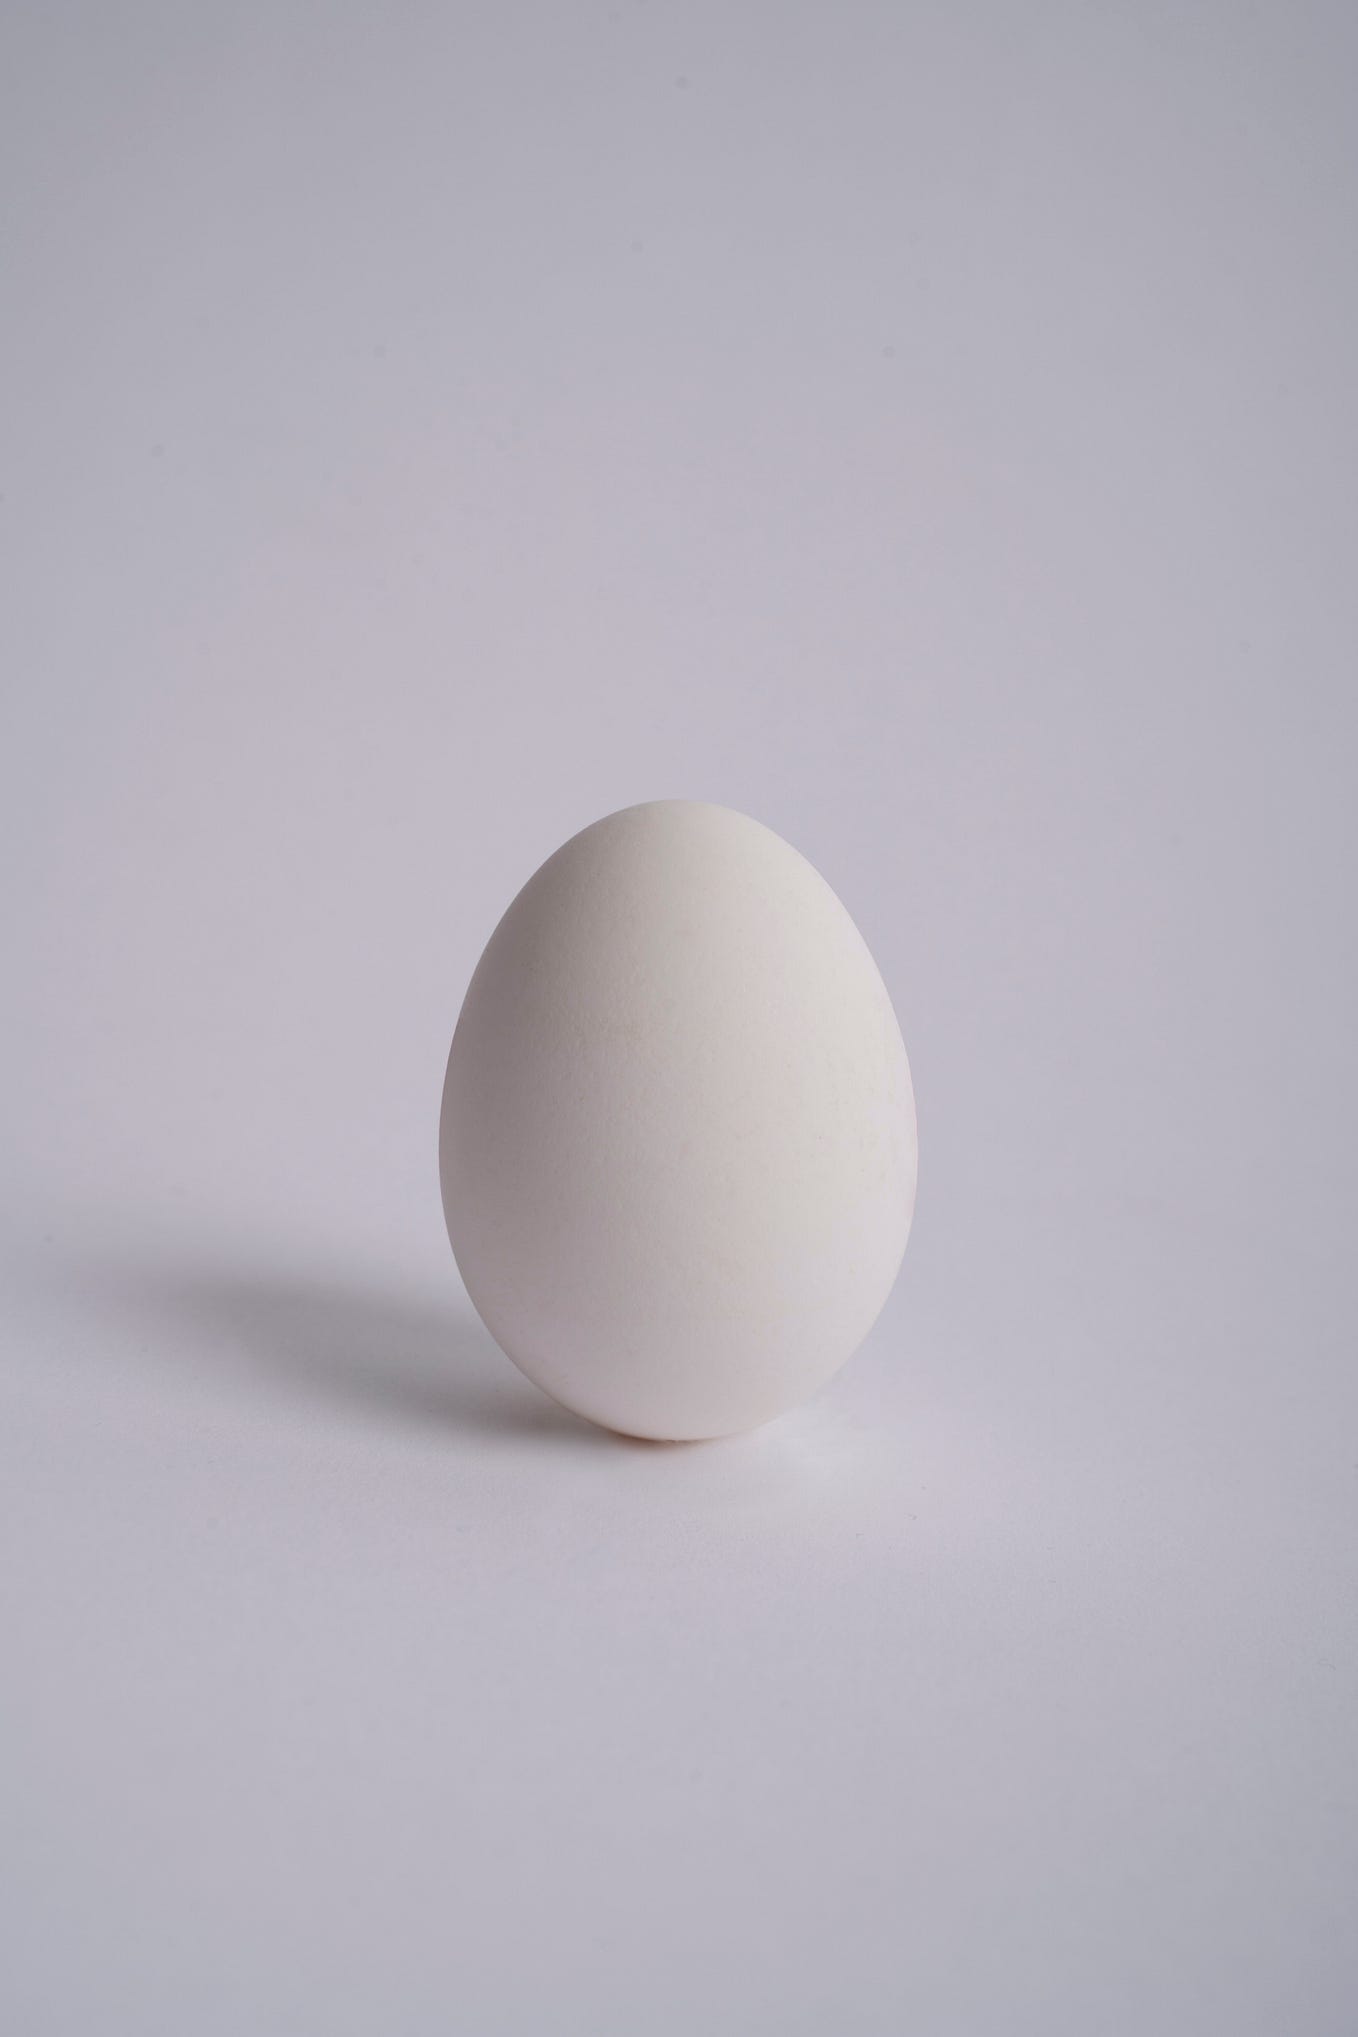 A Psychedelic Experience Helped Confirm The Egg Theory